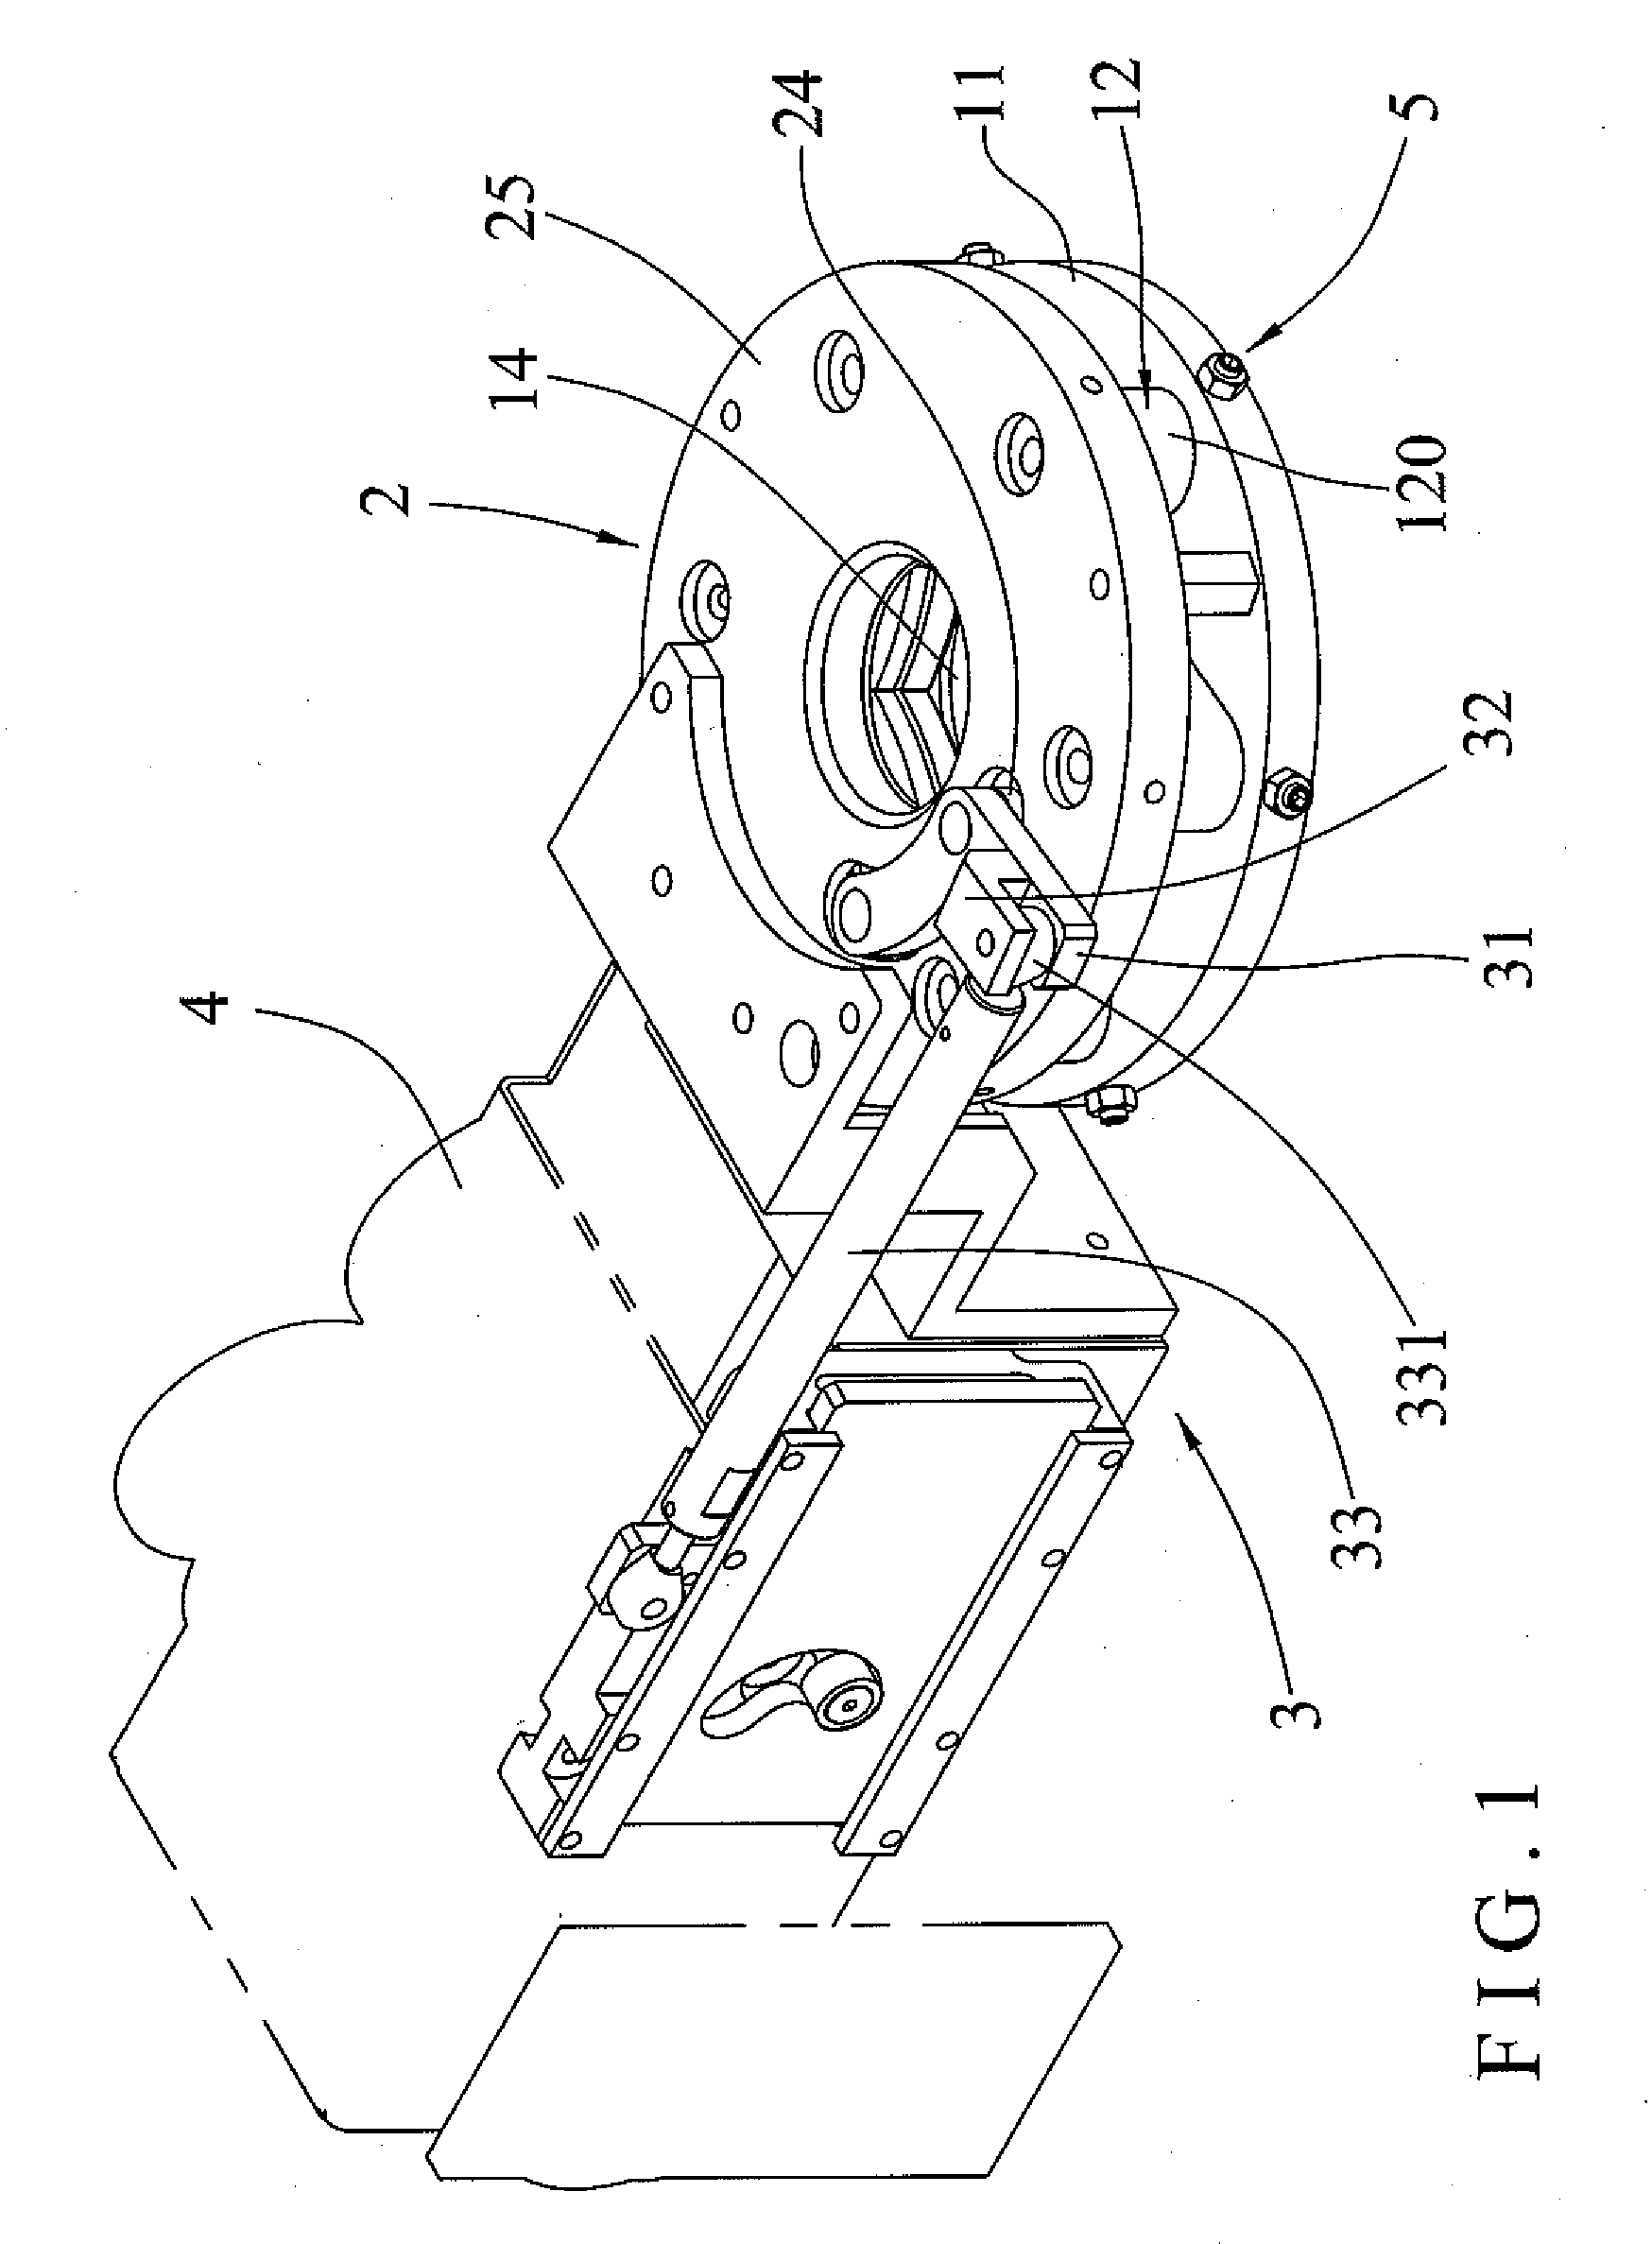 Food Processor Cutting Device Having a Position Adjustment Function